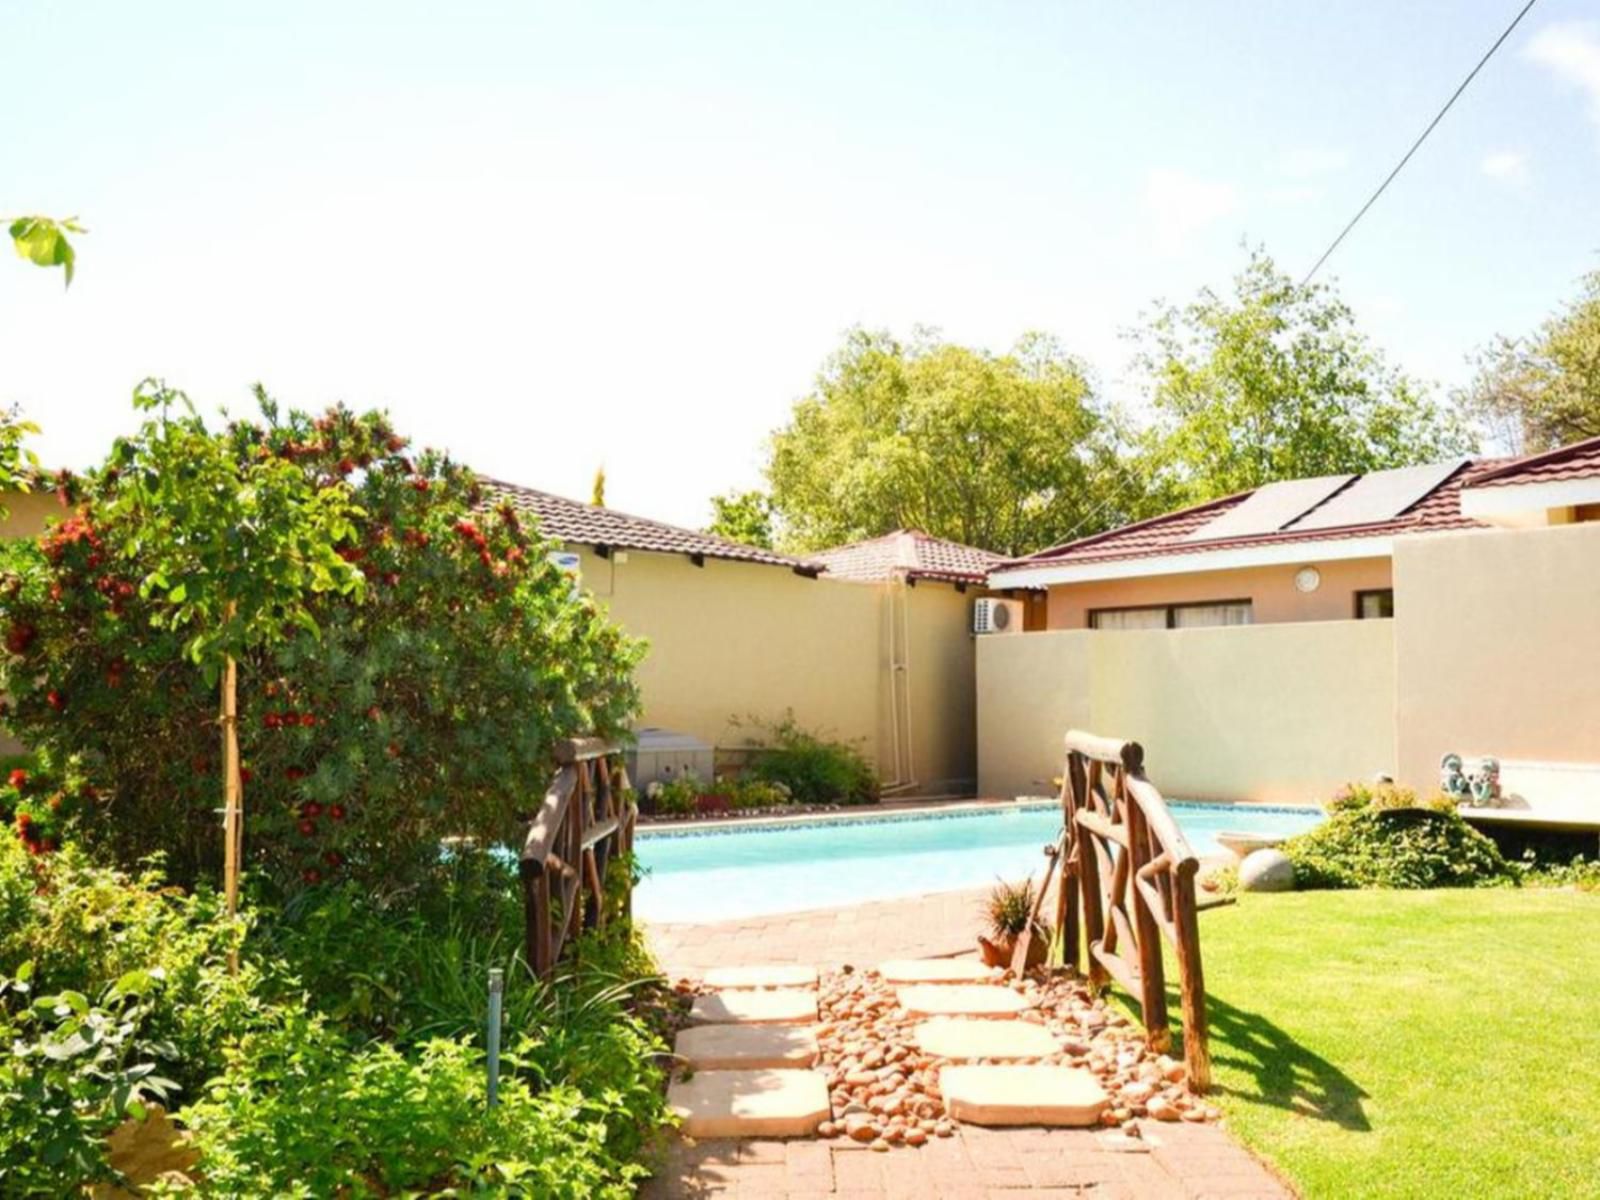 Wille Garden Flair Guesthouse Universitas Bloemfontein Free State South Africa House, Building, Architecture, Garden, Nature, Plant, Swimming Pool